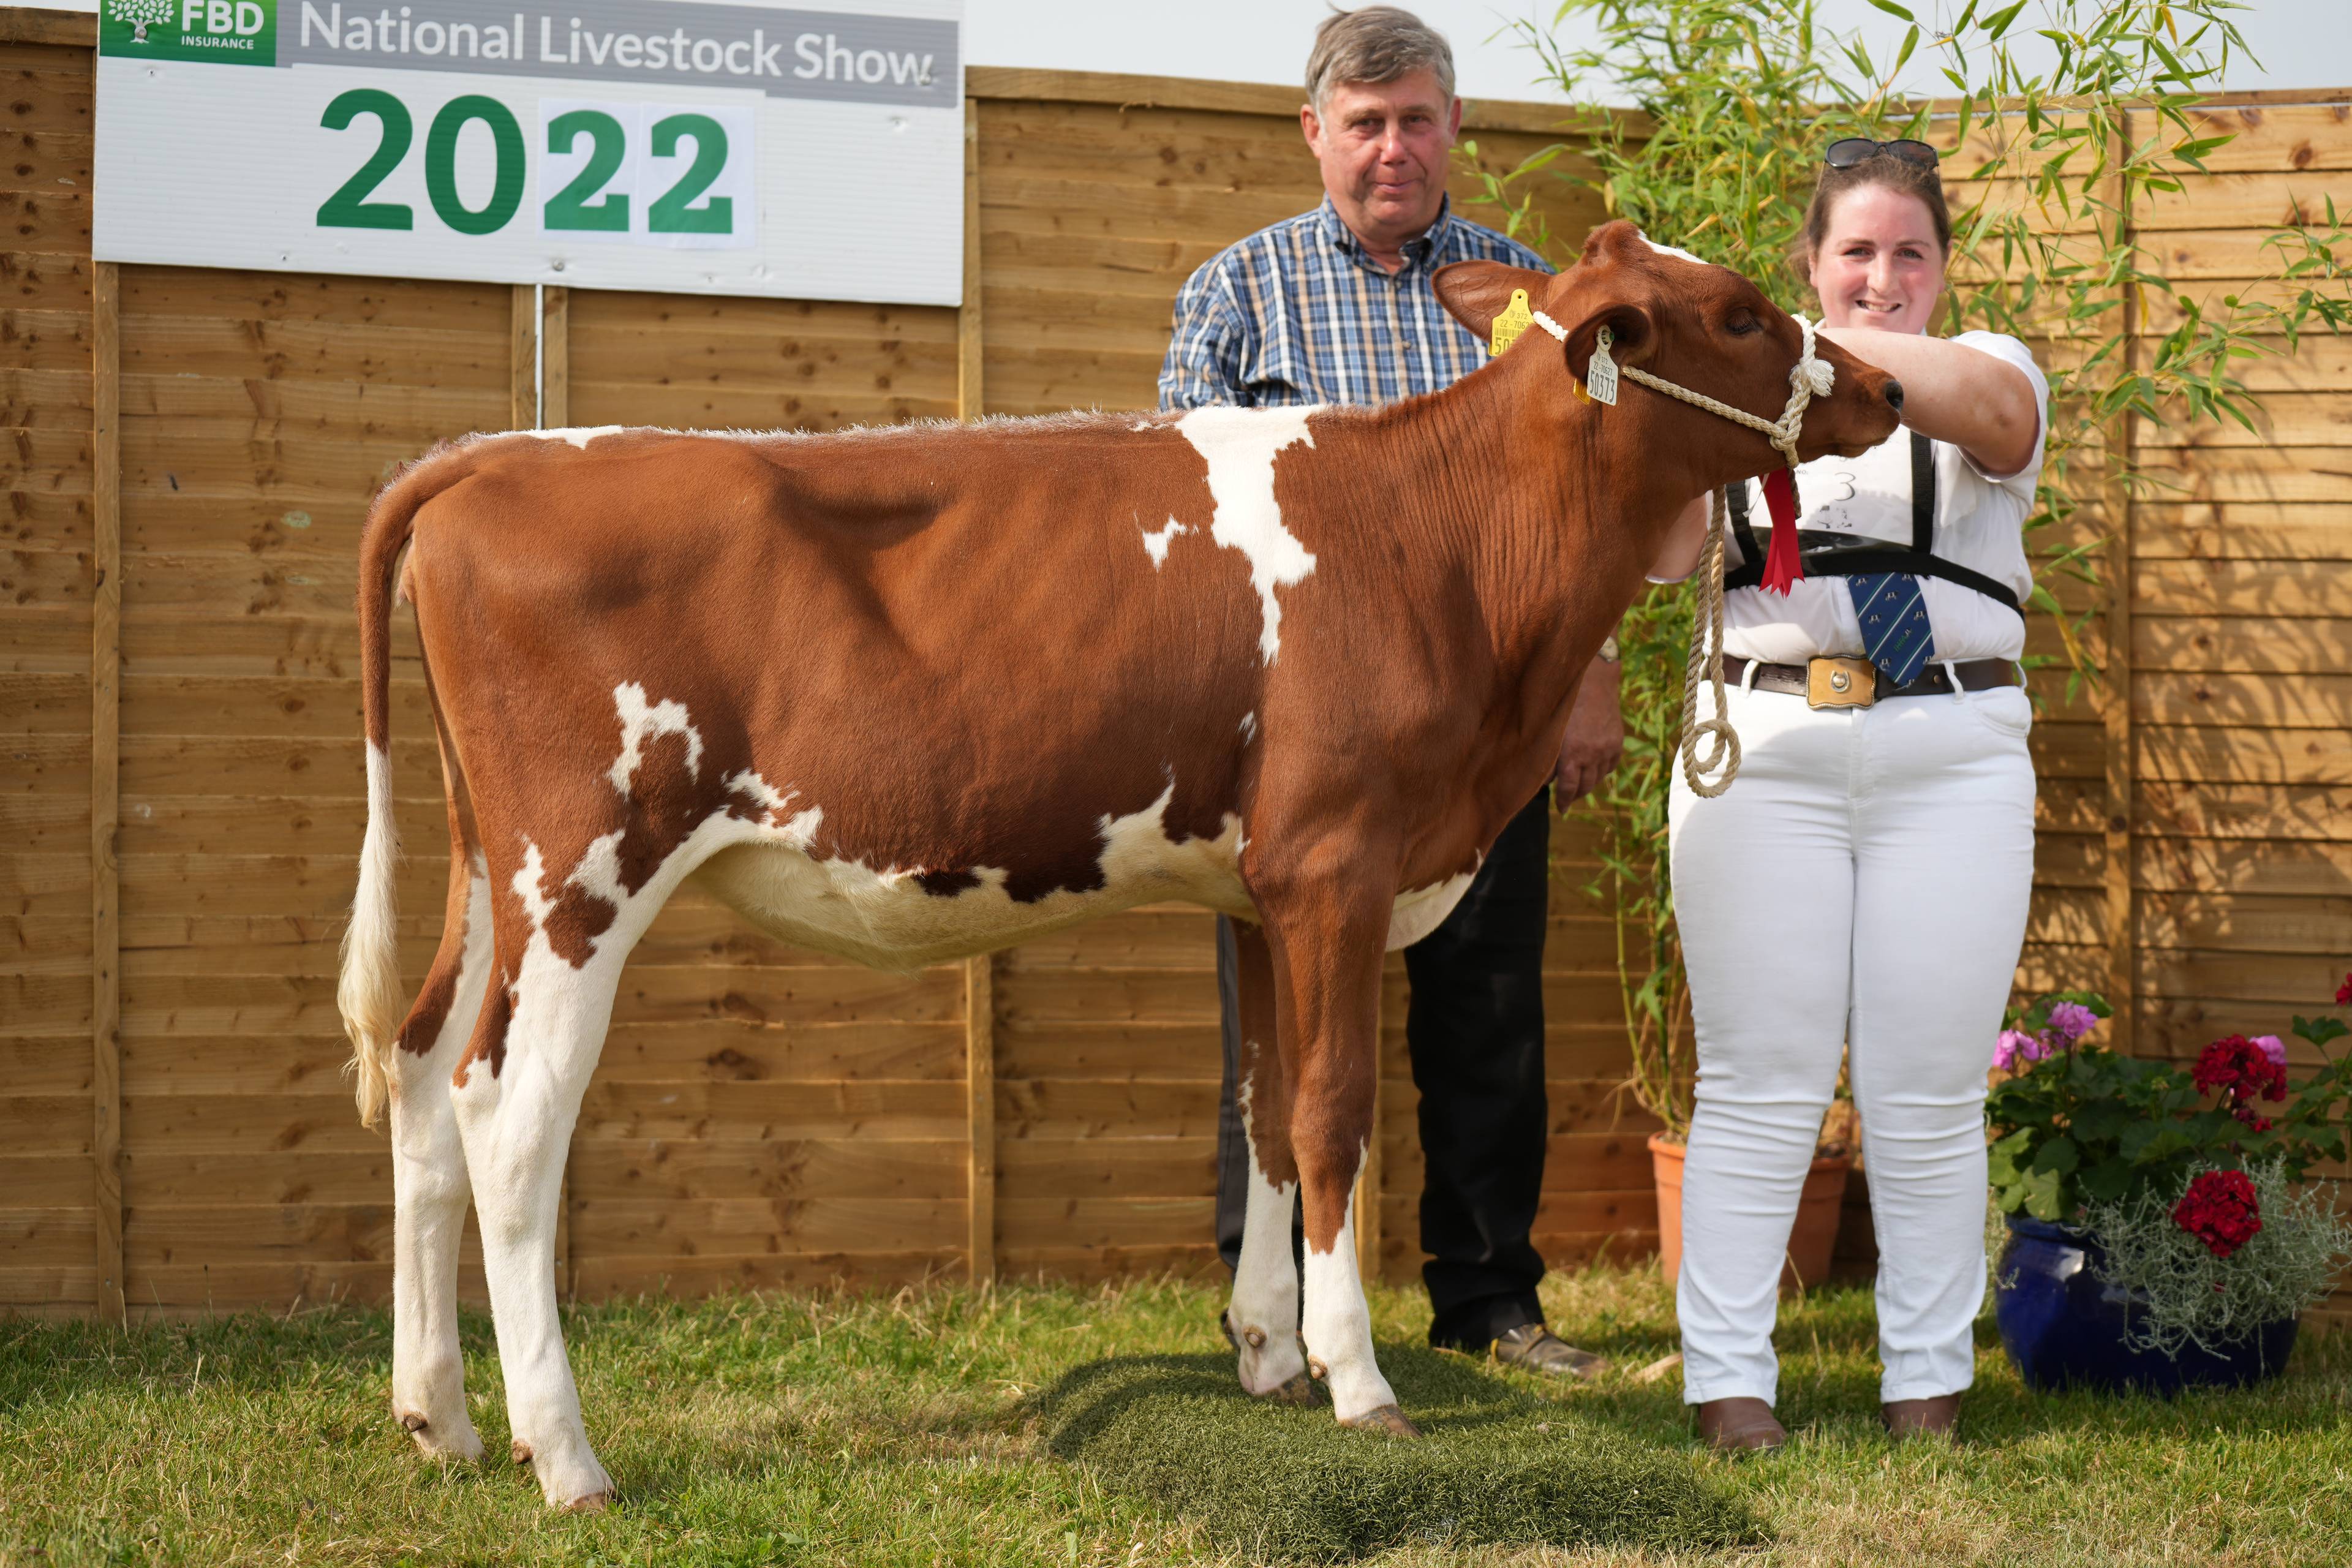 Aisling Neville with her Youri (FR5722) sired heifer calf.